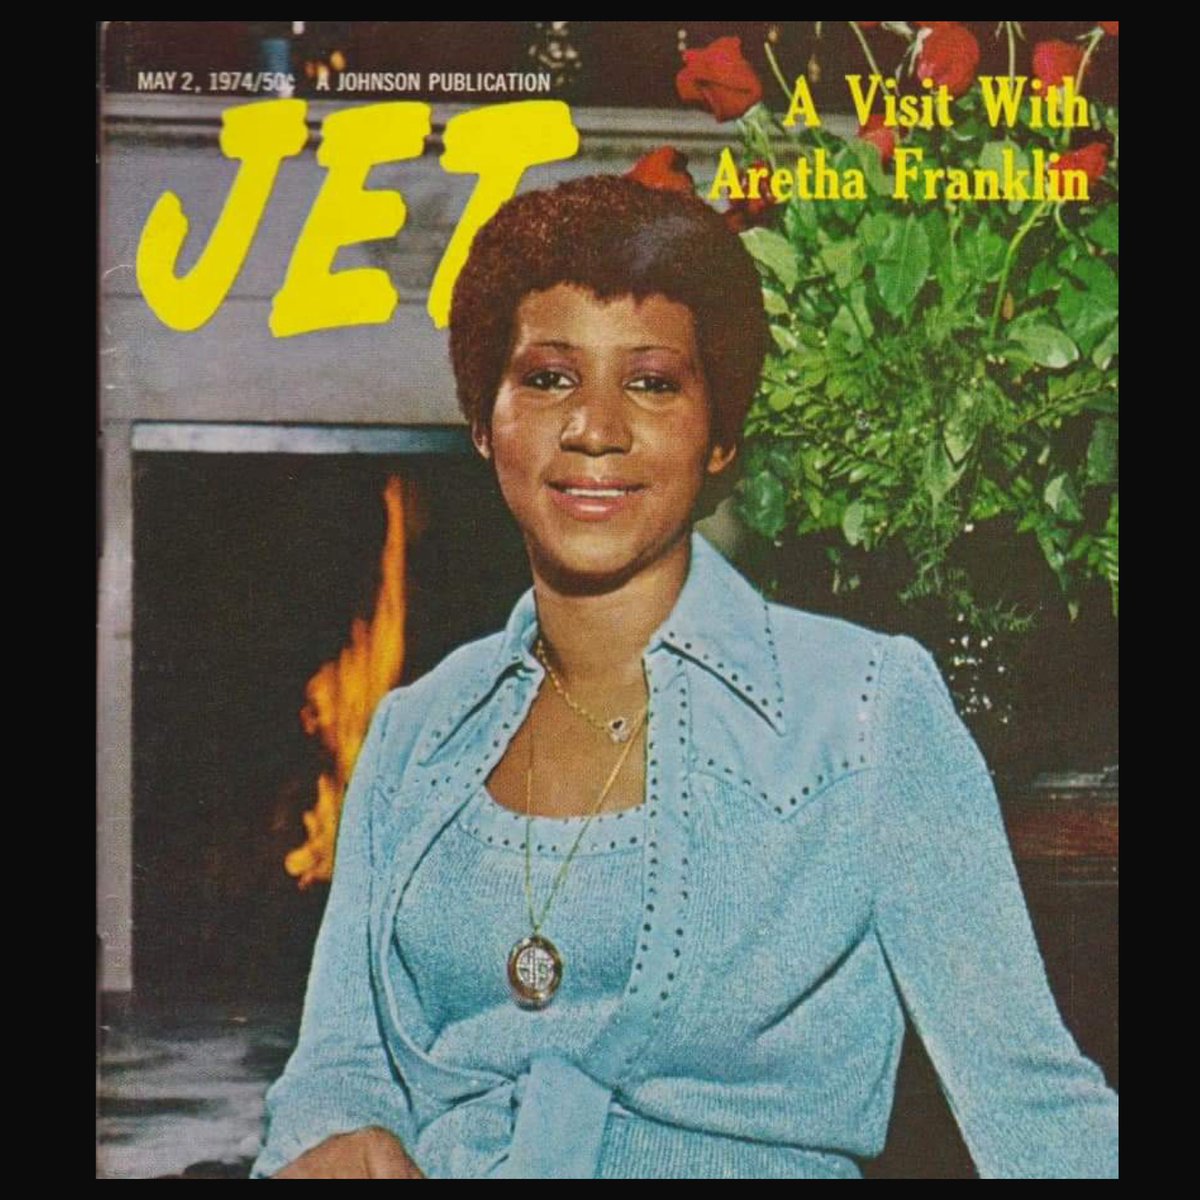 50 years ago today, #ArethaFranklin appeared on the cover of Jet.

“I’ll be happy as long as I have people around me who care for me and want to see me happy.” AF